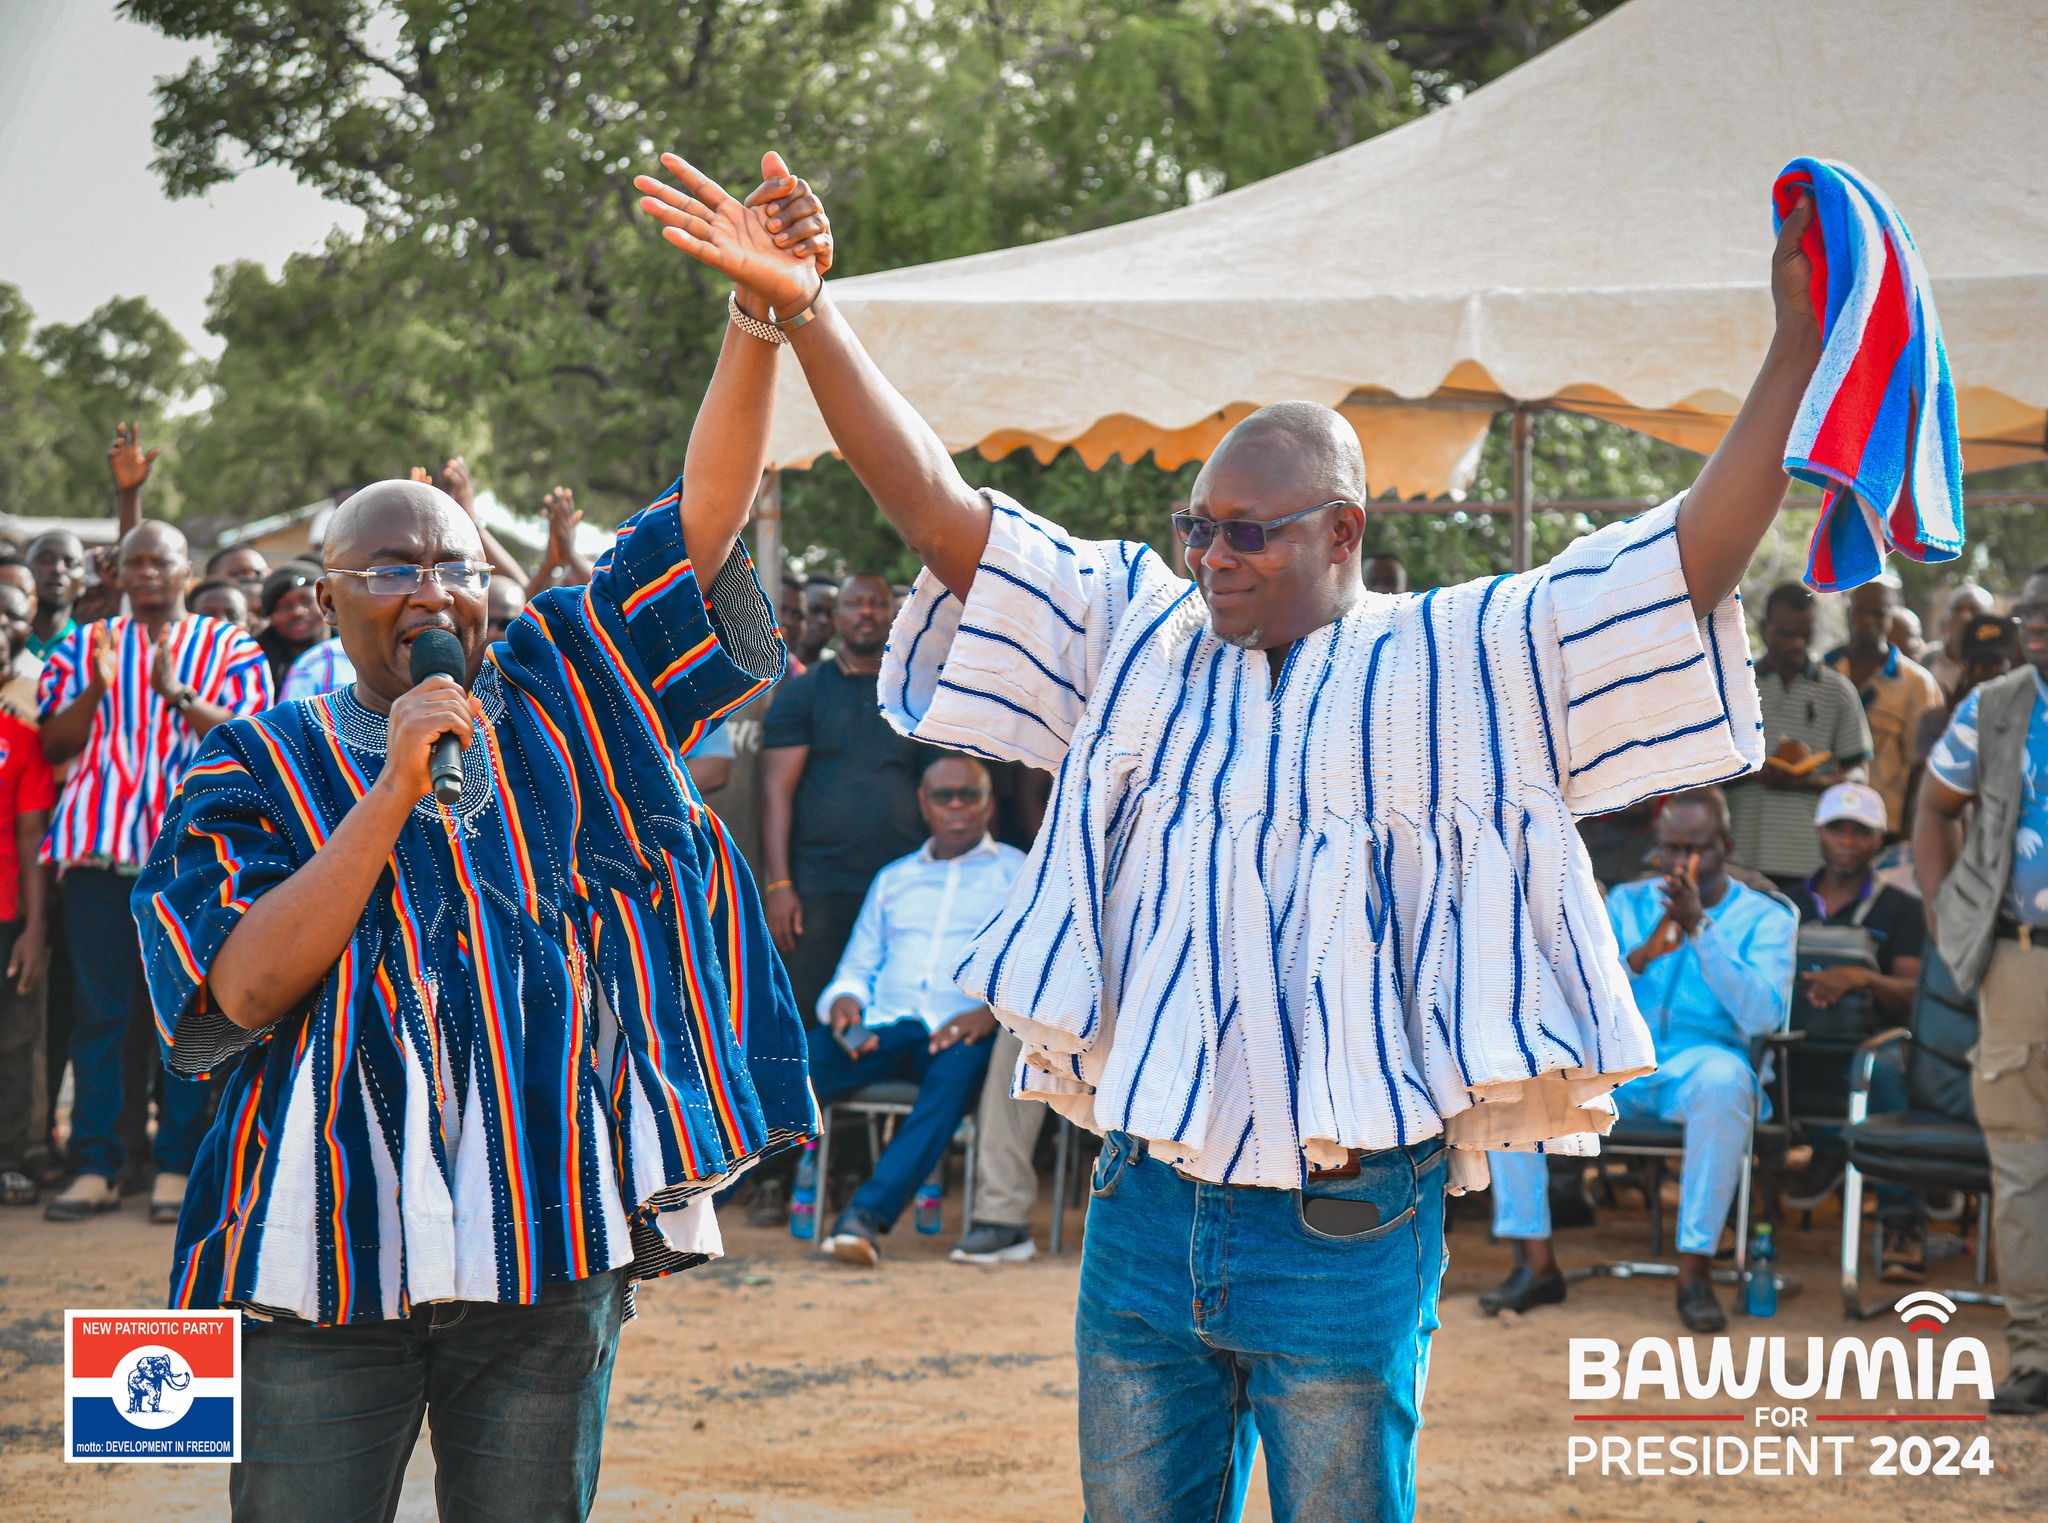 Vice President Bawumia to formalize small-scale mining when elected into office